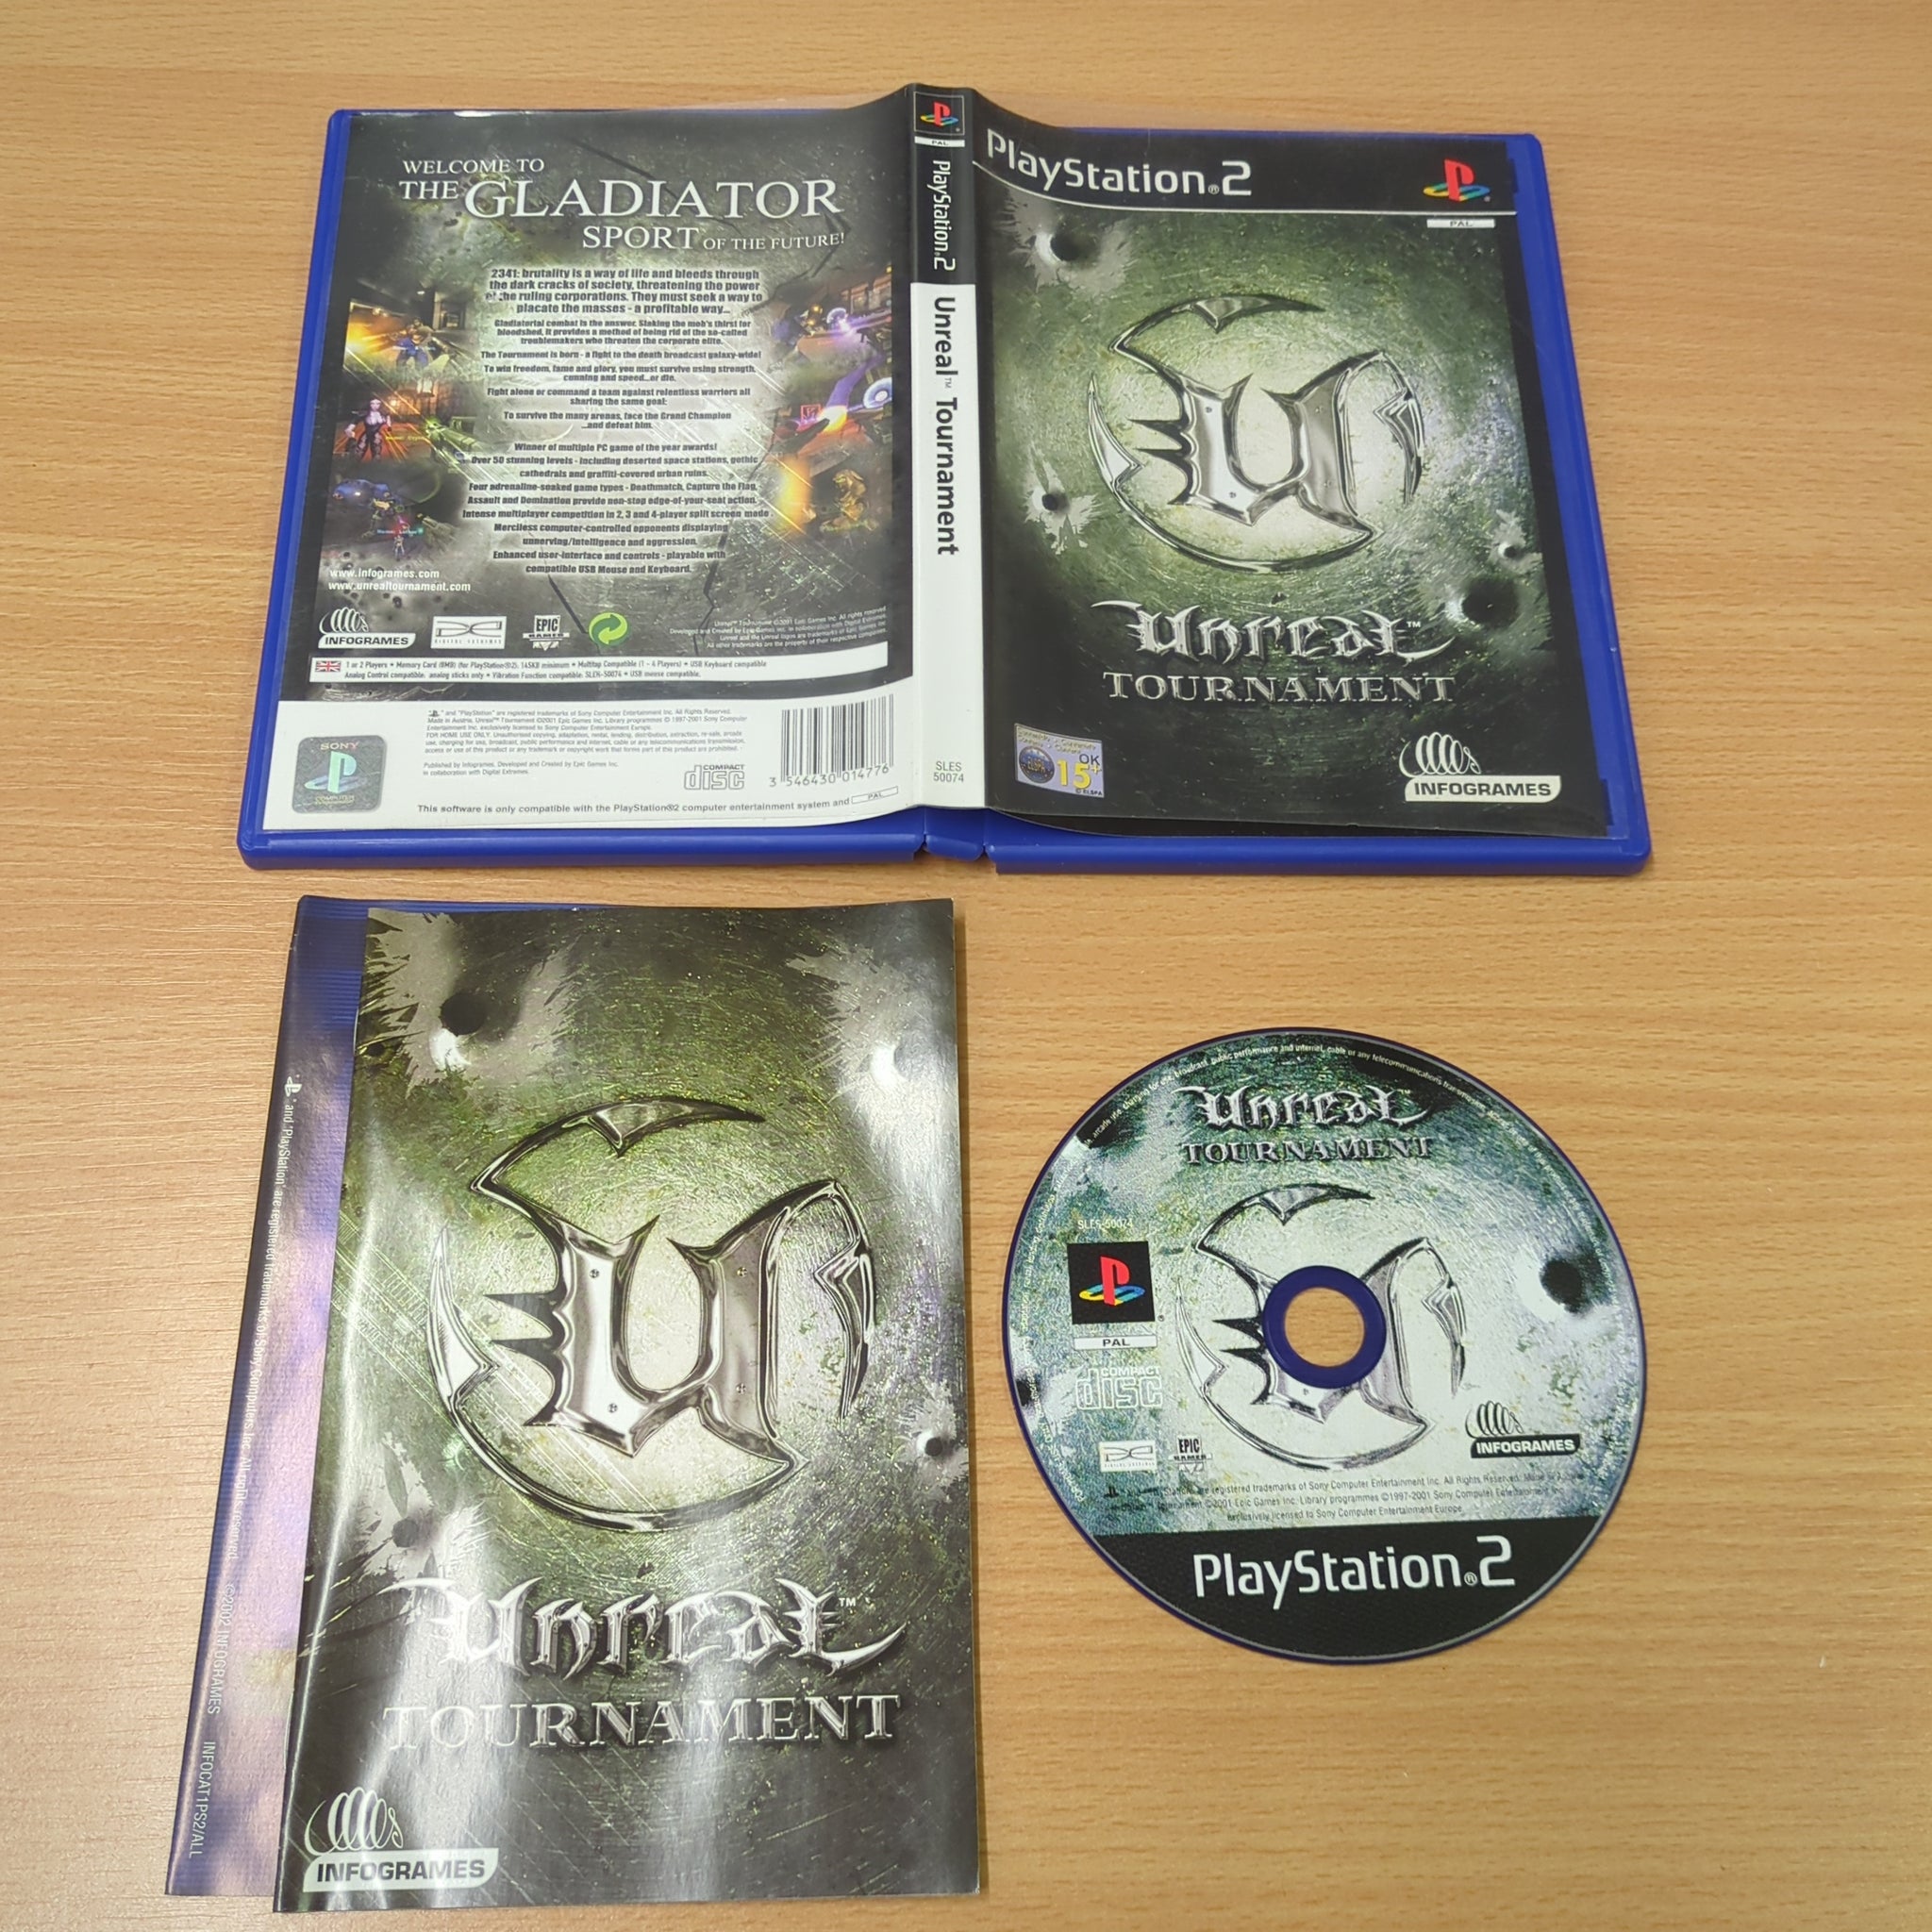 Unreal Tournament Sony PS2 game